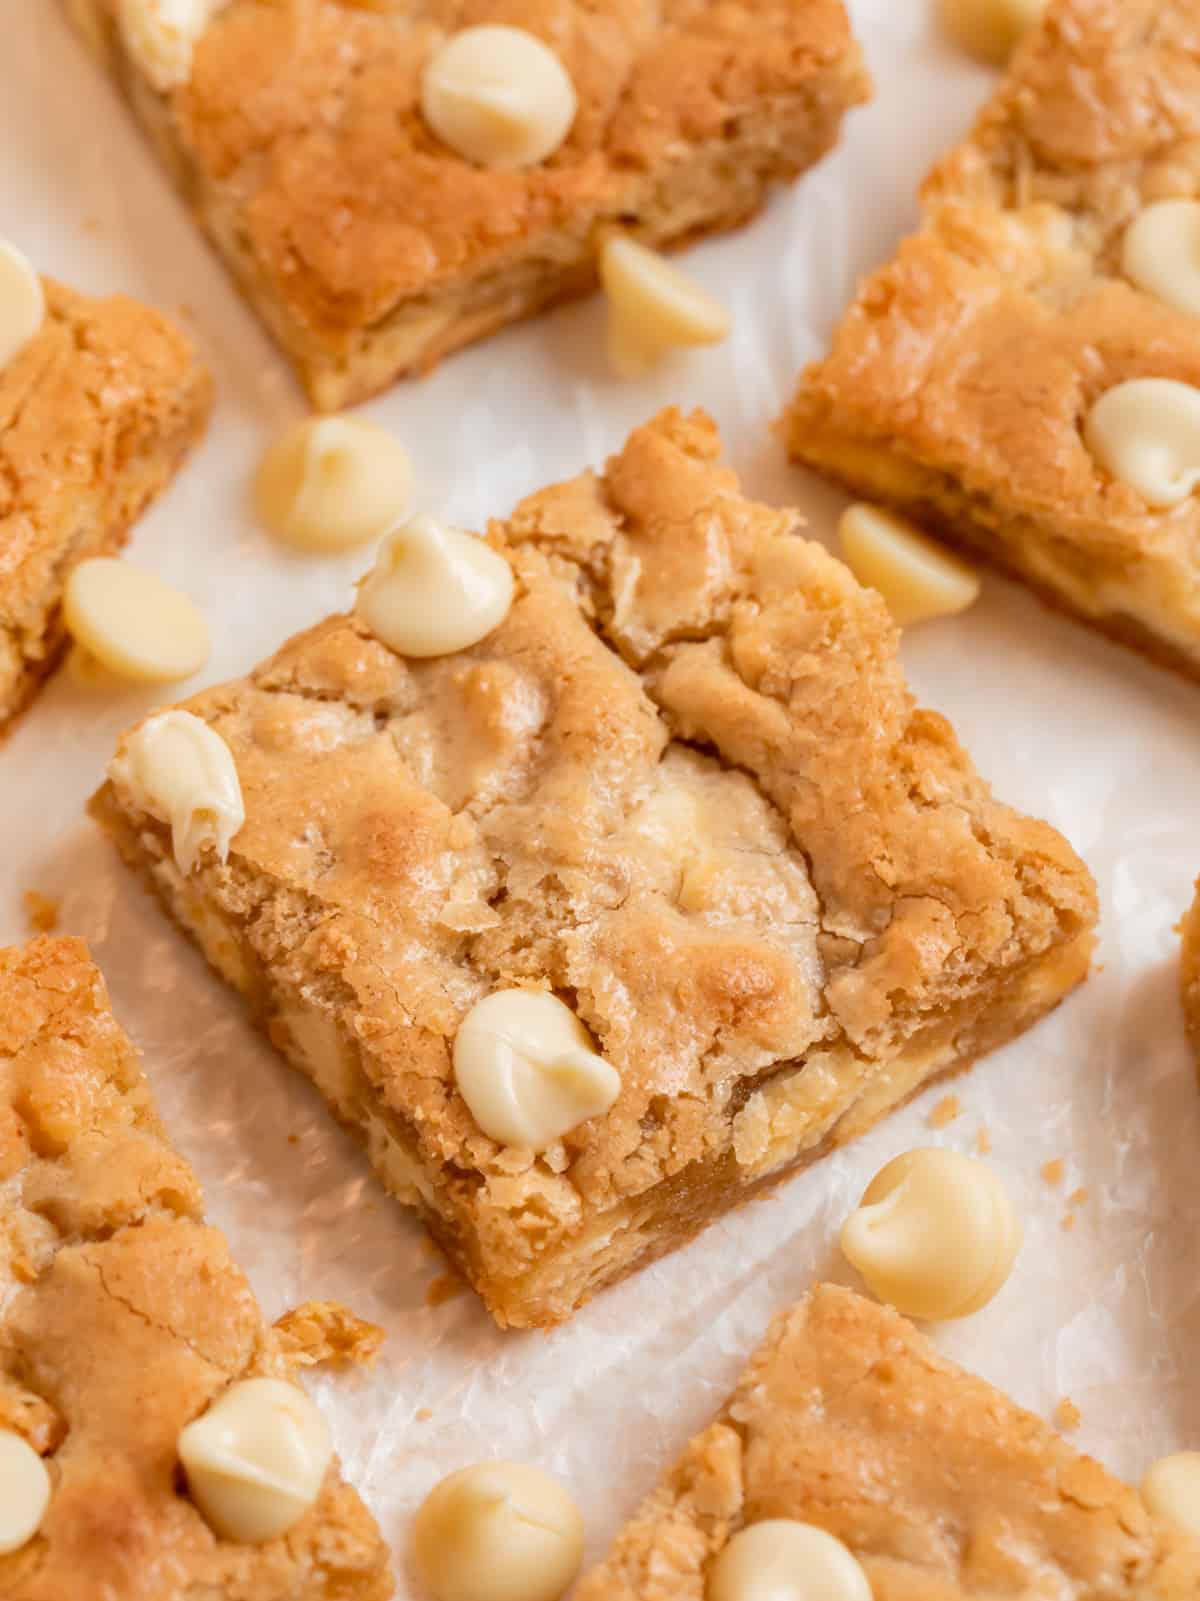 Almond flour blondies lined on wax paper with white chocolate chips.